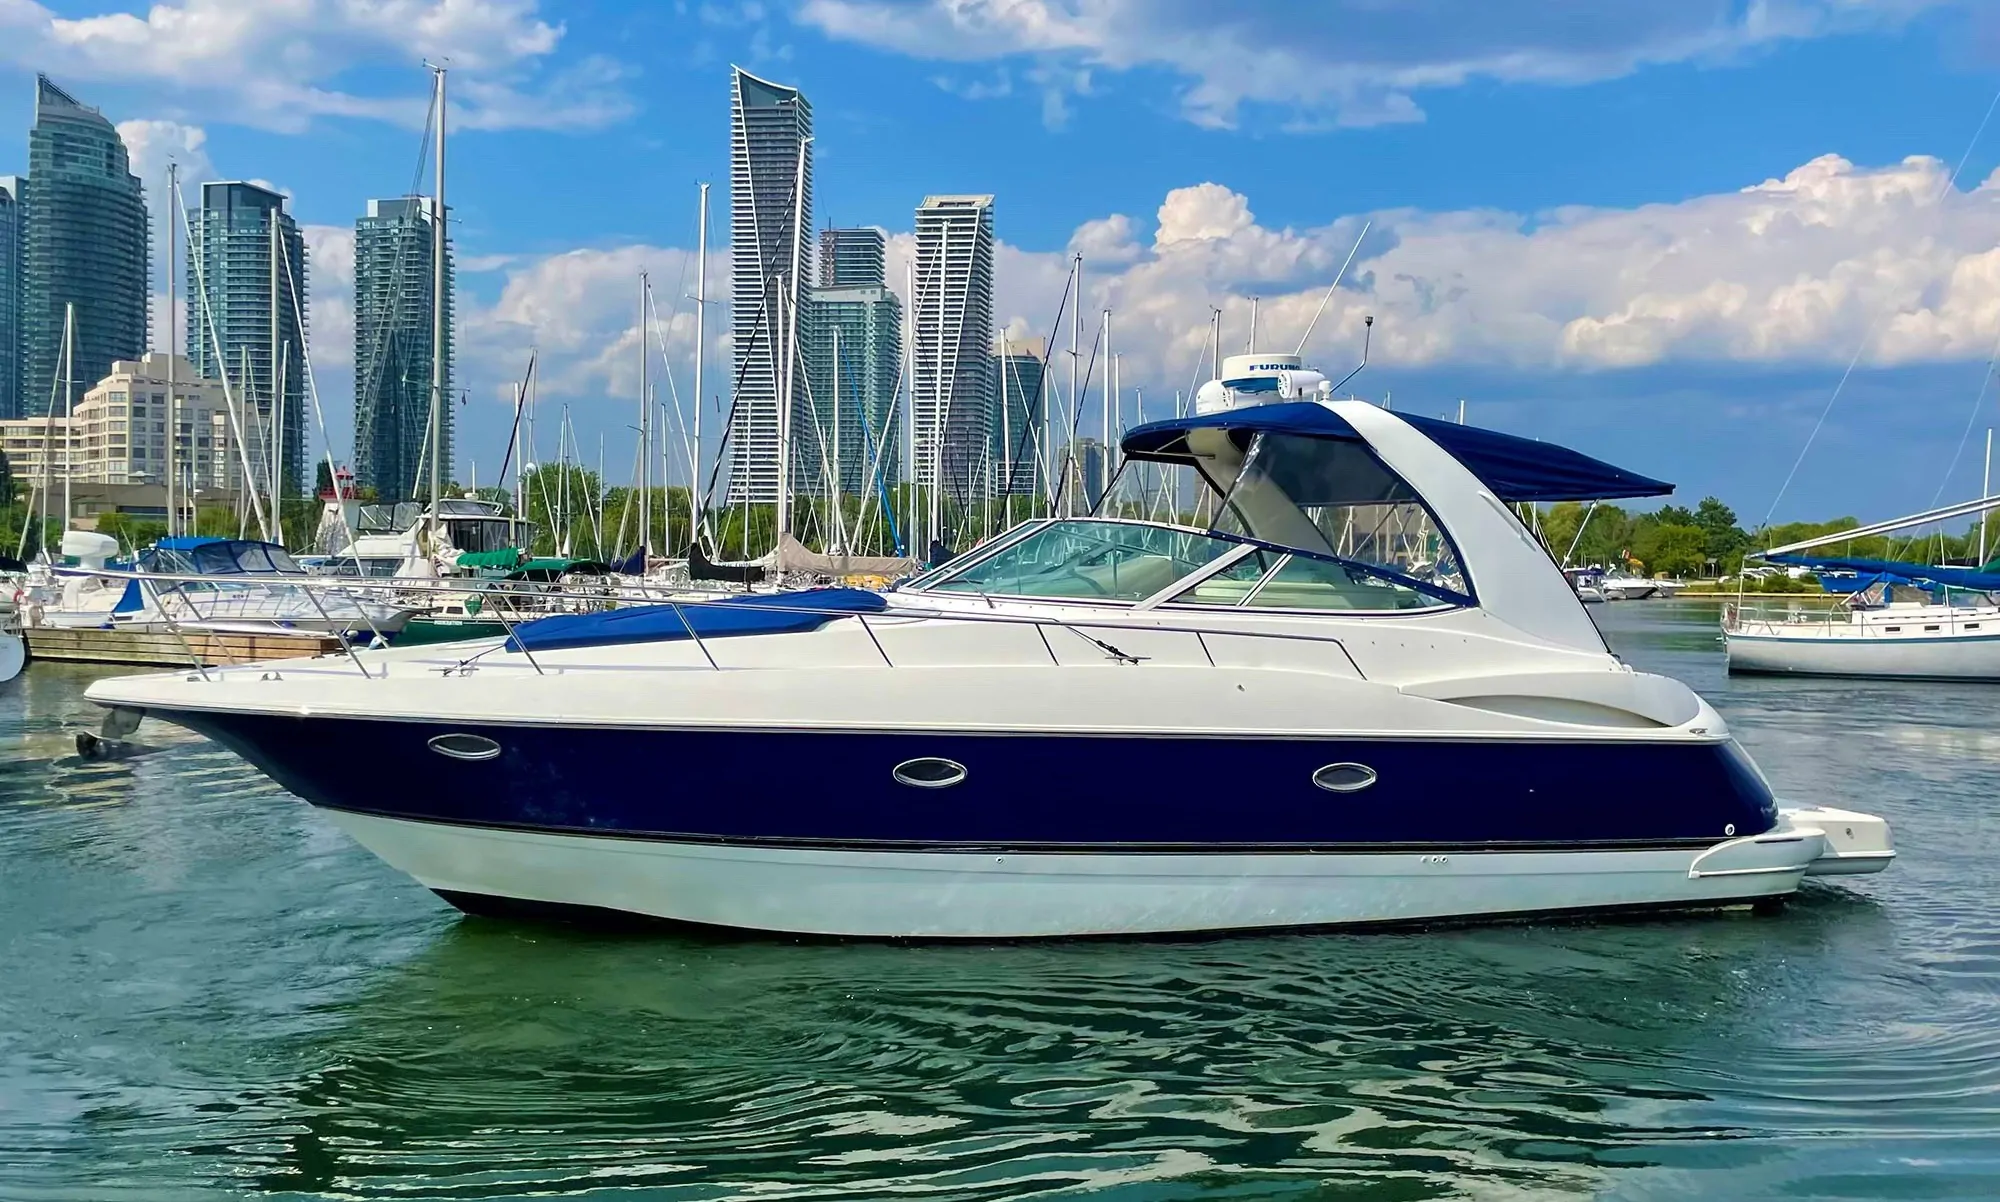 Enjoying Luxury on the Water by Renting a Yacht in Toronto